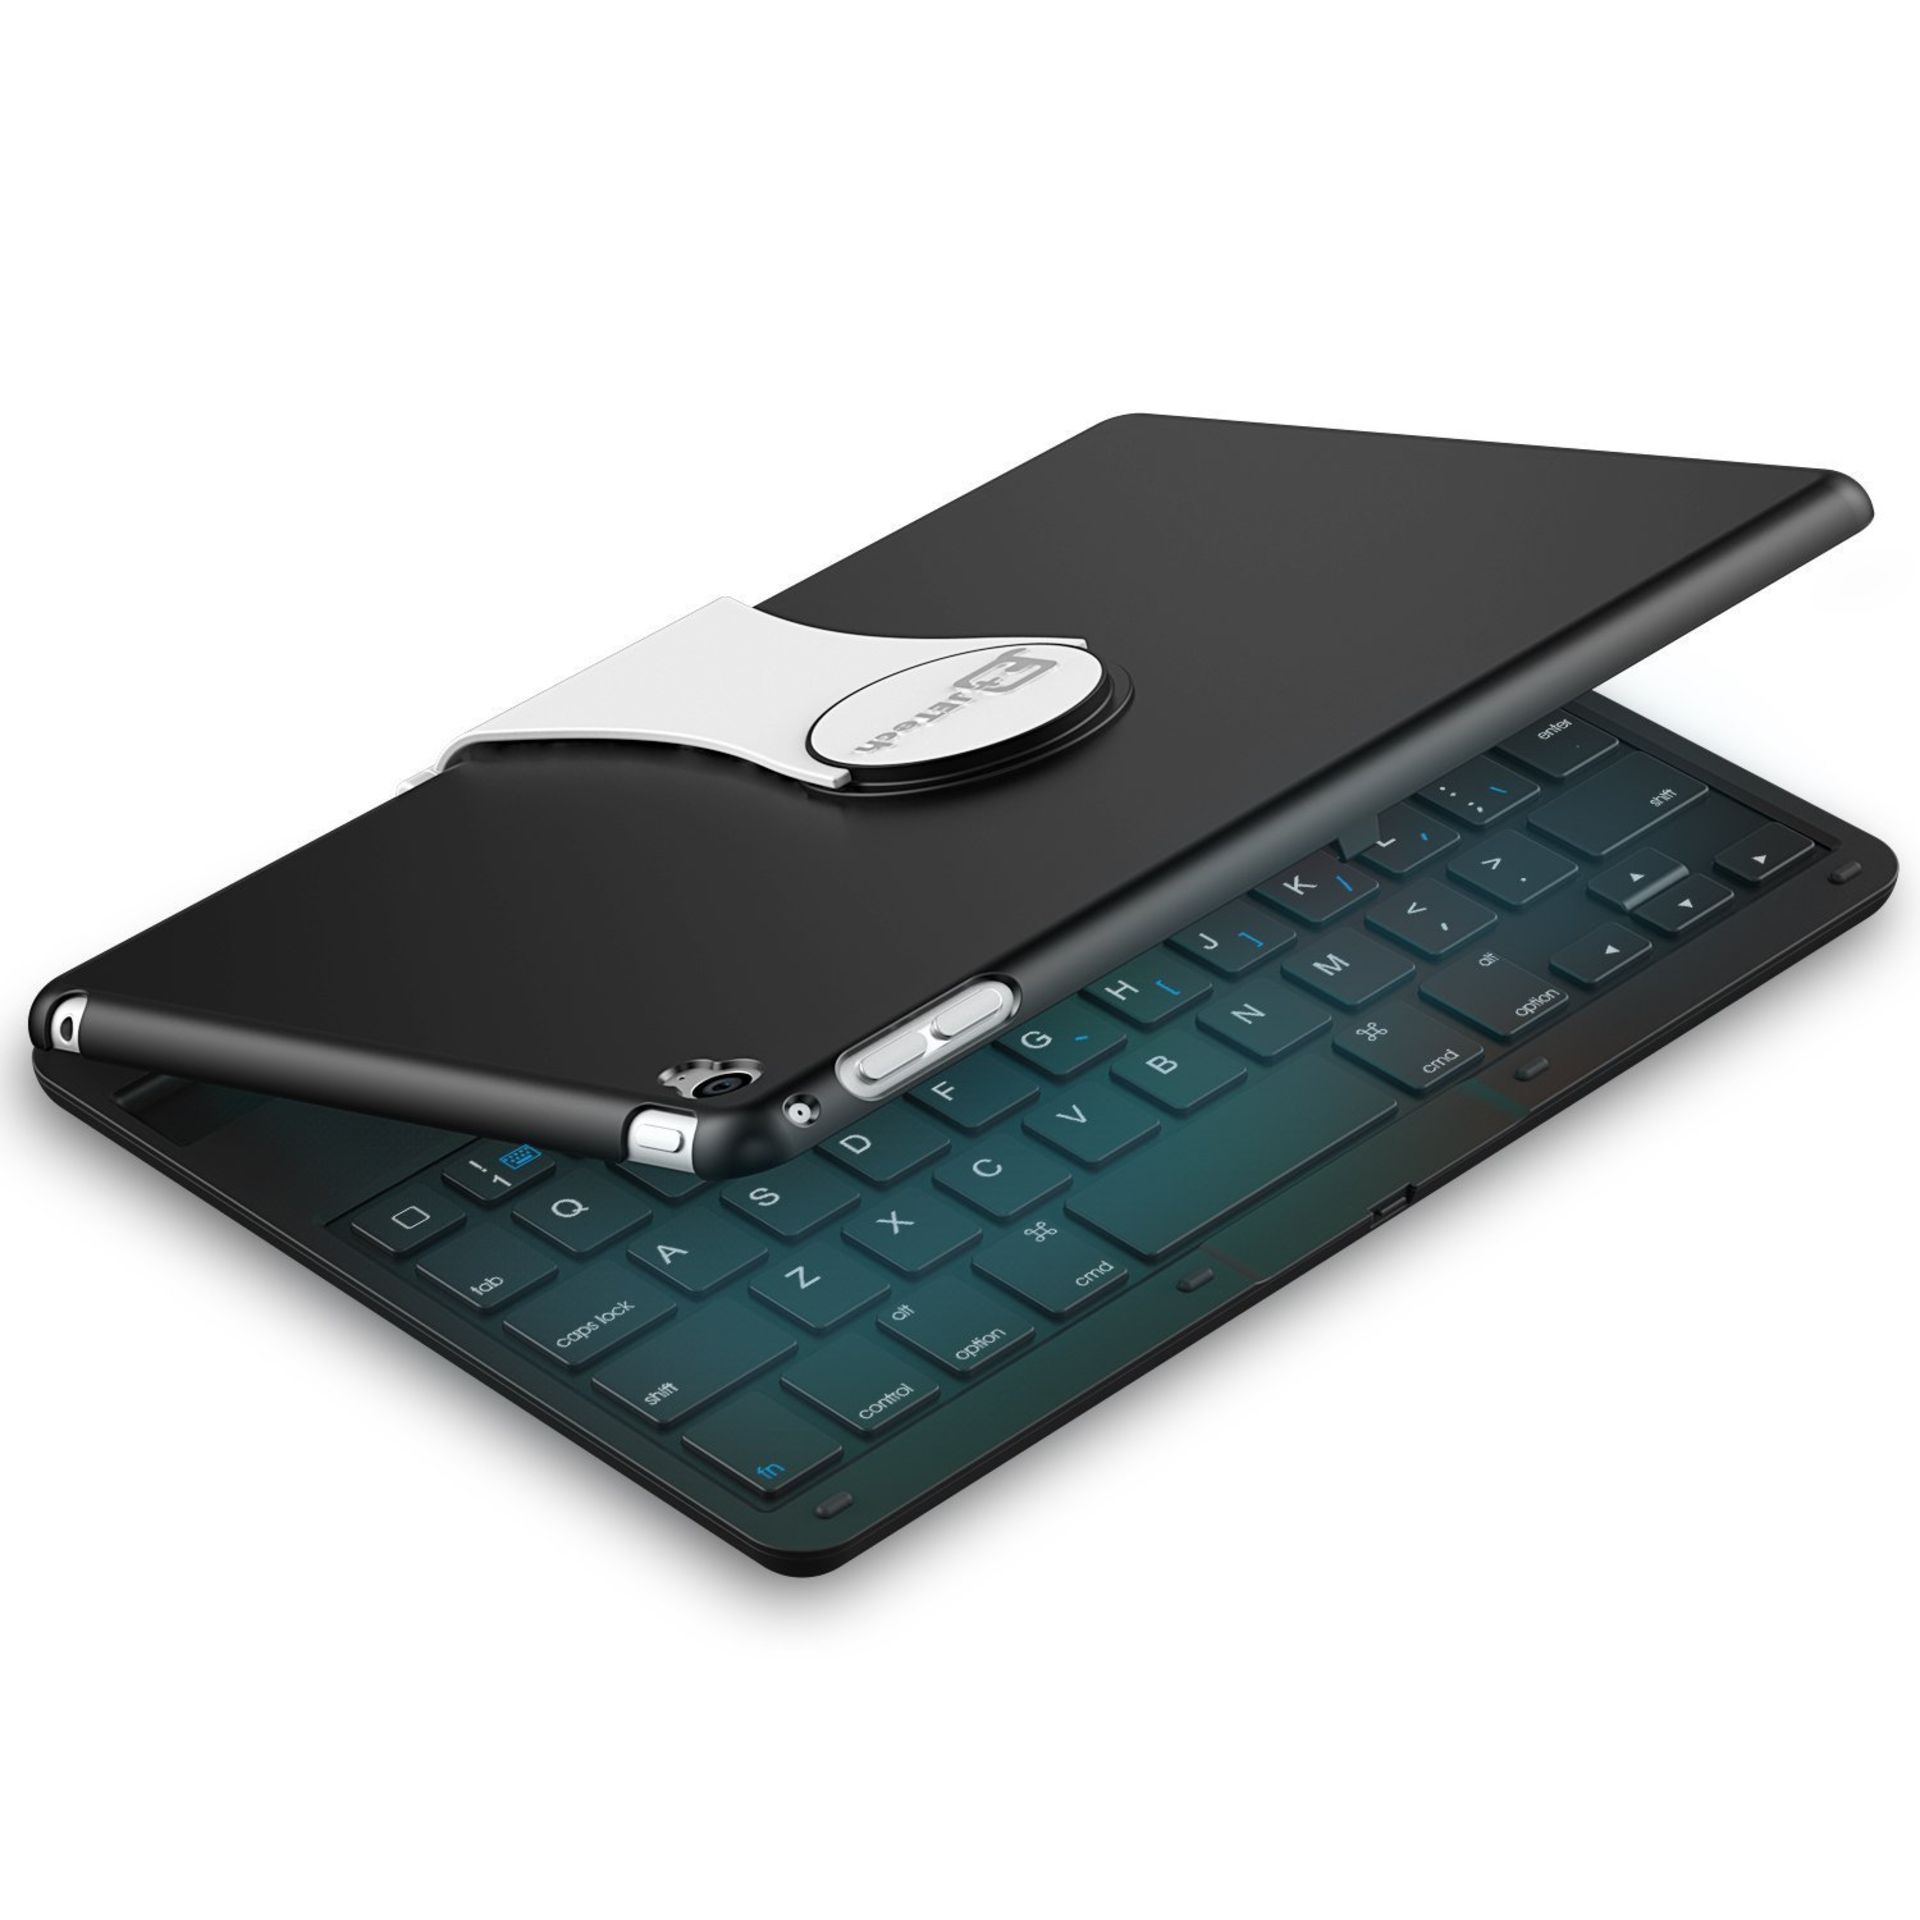 V *TRADE QTY* Brand New Bluetooth Keyboard Case For Apple iPad Mini 4 Amazon Price £19.95 X 3 YOUR